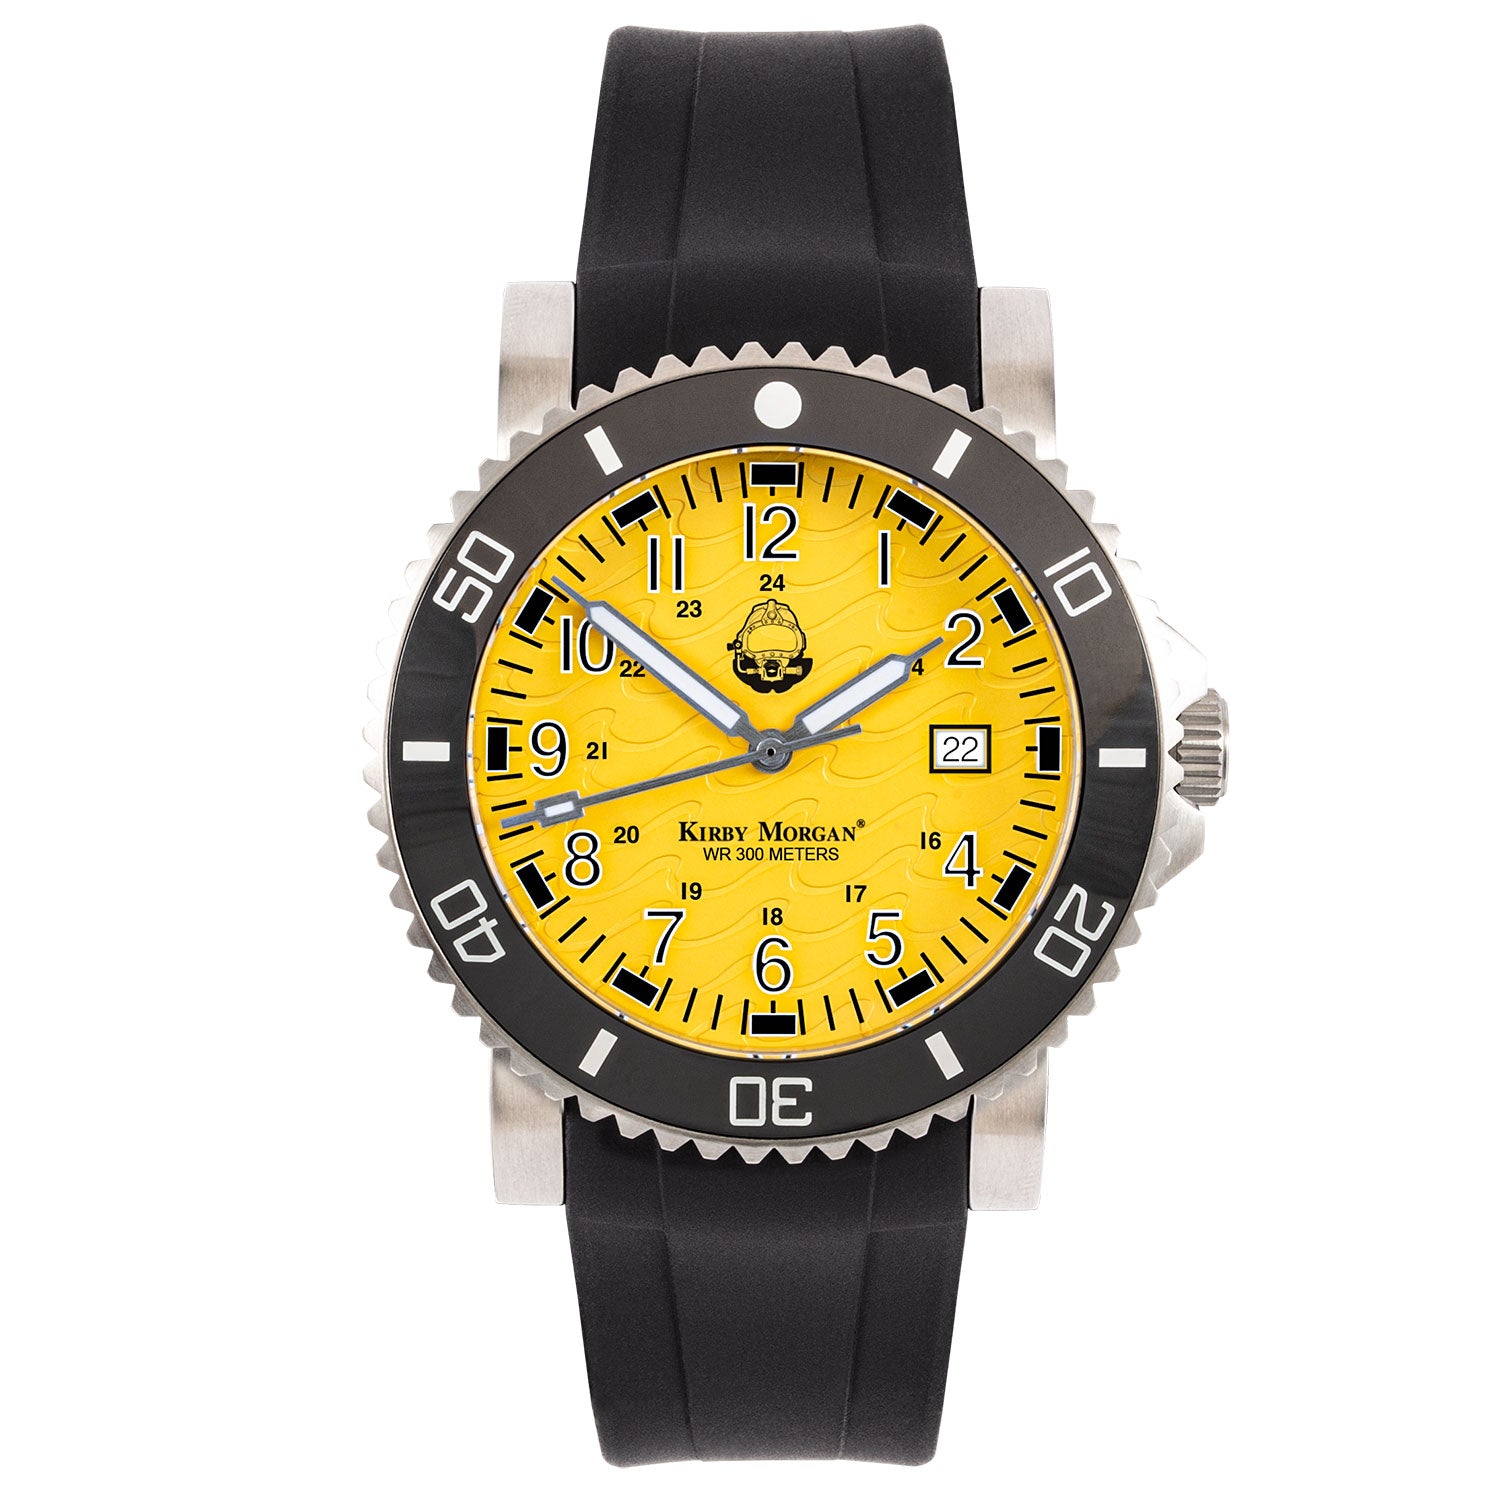 Formex REEF Automatic Chronometer COSC 300M